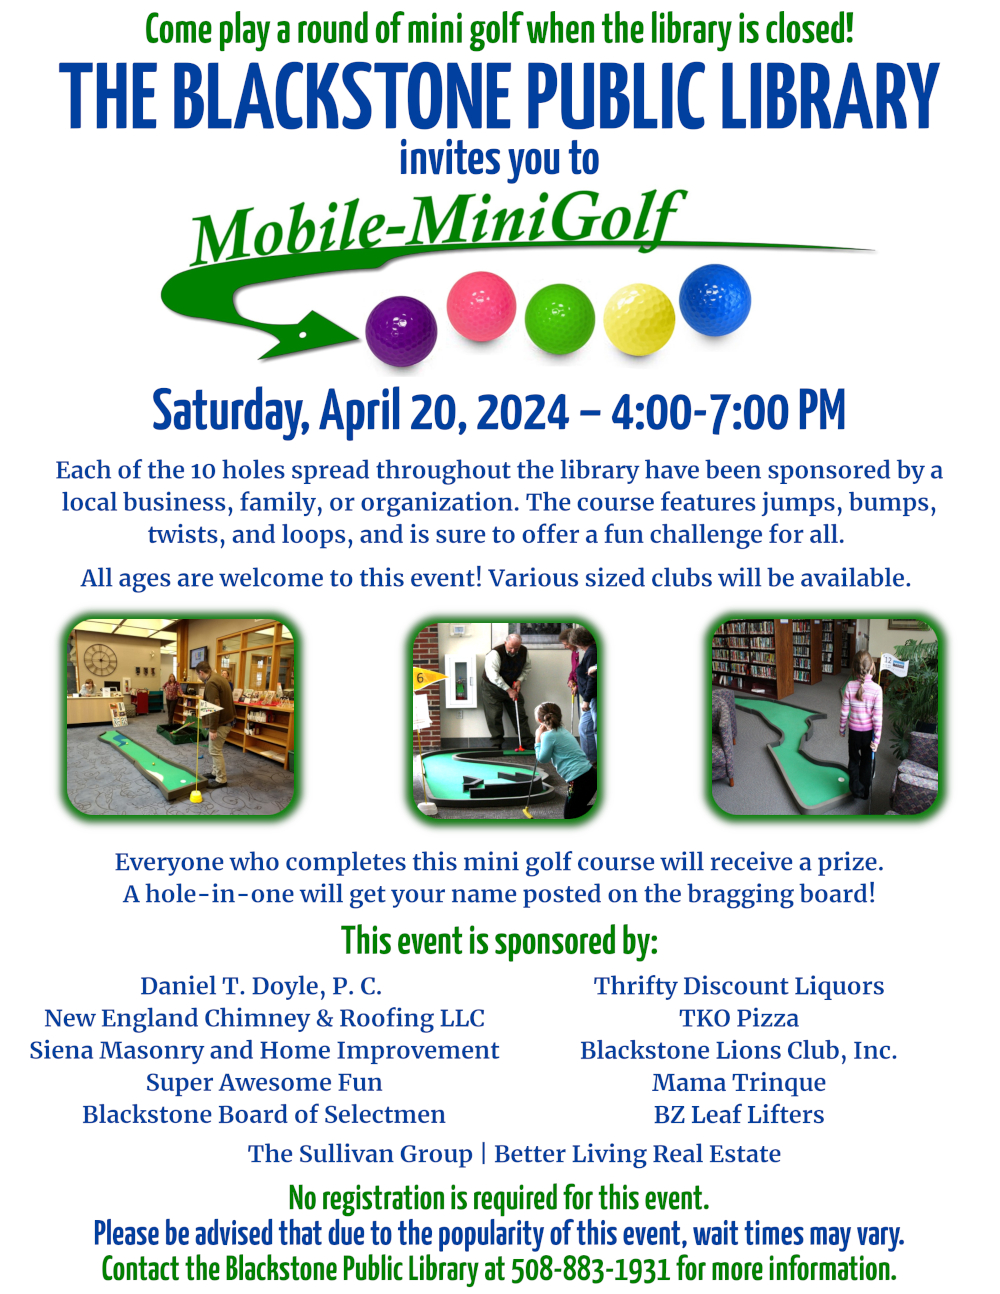 Come play a round of mini golf when the library is closed!  The Blackstone Public Library invites you to Mobile Mini Golf! Saturday, April 20, 2024 from 4:00 – 7:00 PM.  Each of the 10 holes spread throughout the library have been sponsored by a local business, family, or organization. The course features jumps, bumps, twists, and loops, and is sure to offer a fun challenge for all.  All ages are welcome to this event. Various sized clubs will be available.  Everyone who completes the course will receive a prize – also sponsored by a local business, family, or organization. A hole-in-one will get your name posted on the bragging board!  No registration is required for this event. Please be advised that due to the popularity of this event, wait times may vary. Contact the Blackstone Public Library at 508-883-1931 for more information.  Image description: The flyer features the Mini Golf company’s logo at the top of the page, “Mobile-MiniGolf” with a green arrow underlining it, pointing to four golf balls colored purple, pink, green, yellow, and blue. The flyer also features five photographs of previous minigolf events held by the company.